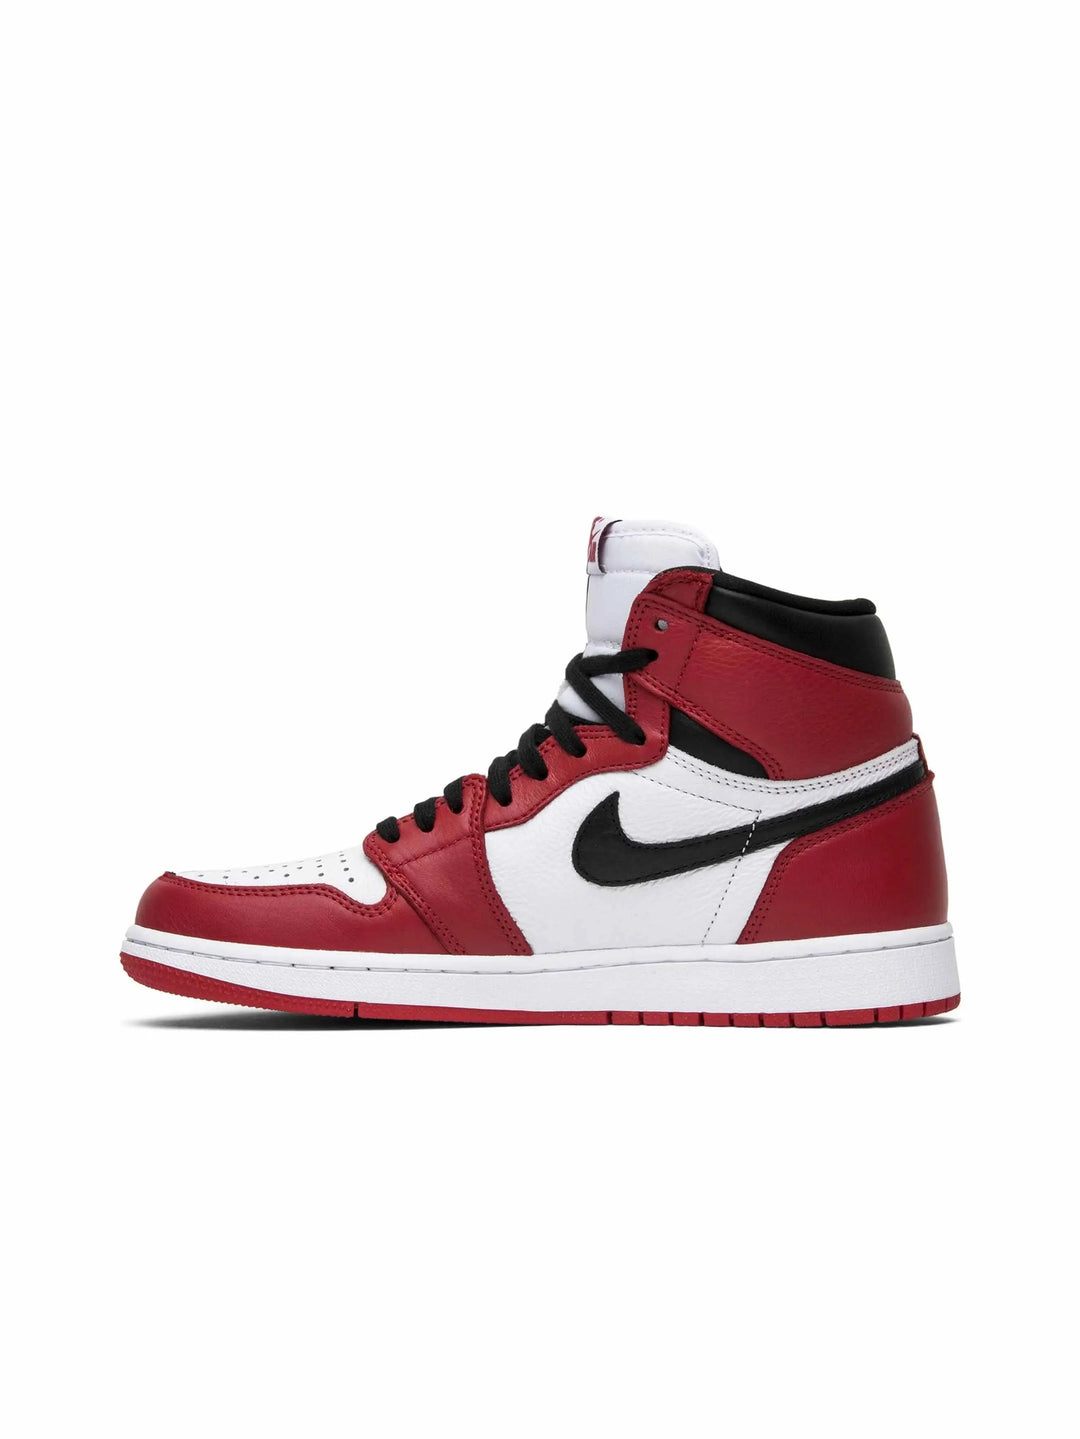 Nike Air Jordan 1 Retro High Homage To Home Chicago (Numbered) in Melbourne, Australia - Prior